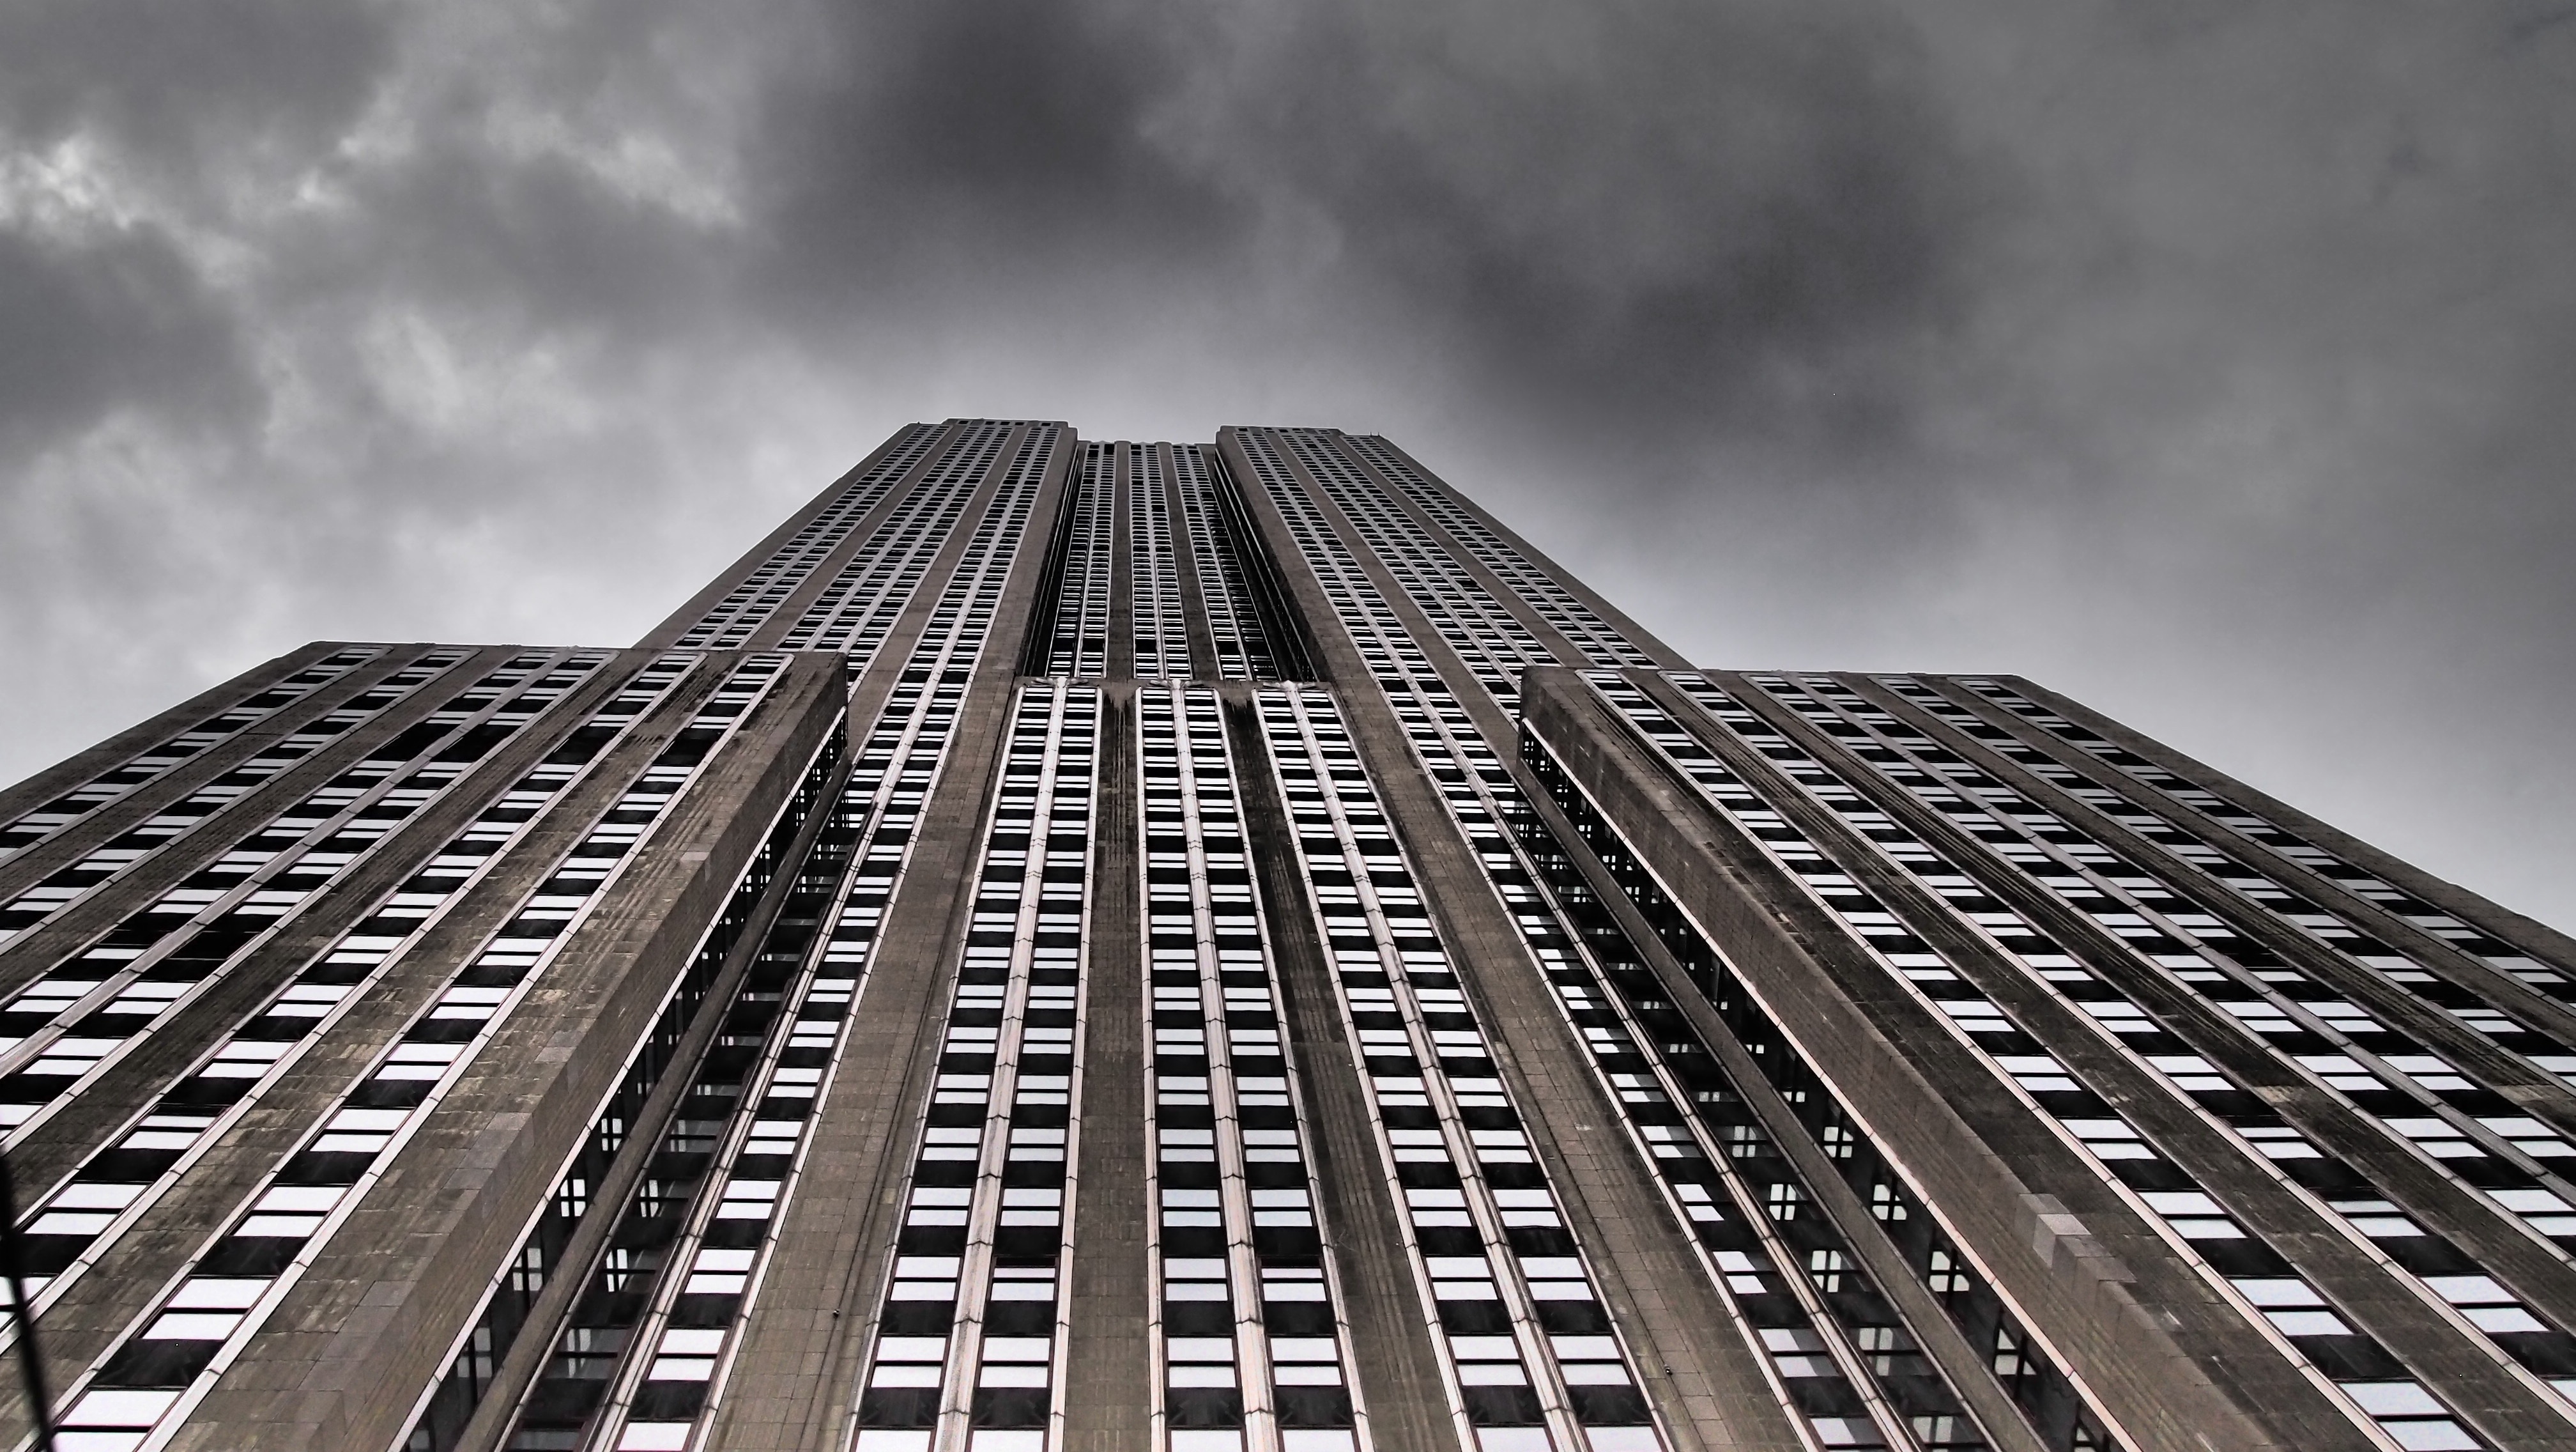 worm's eyeview of gray concrete building under black cloudy sky during daytime